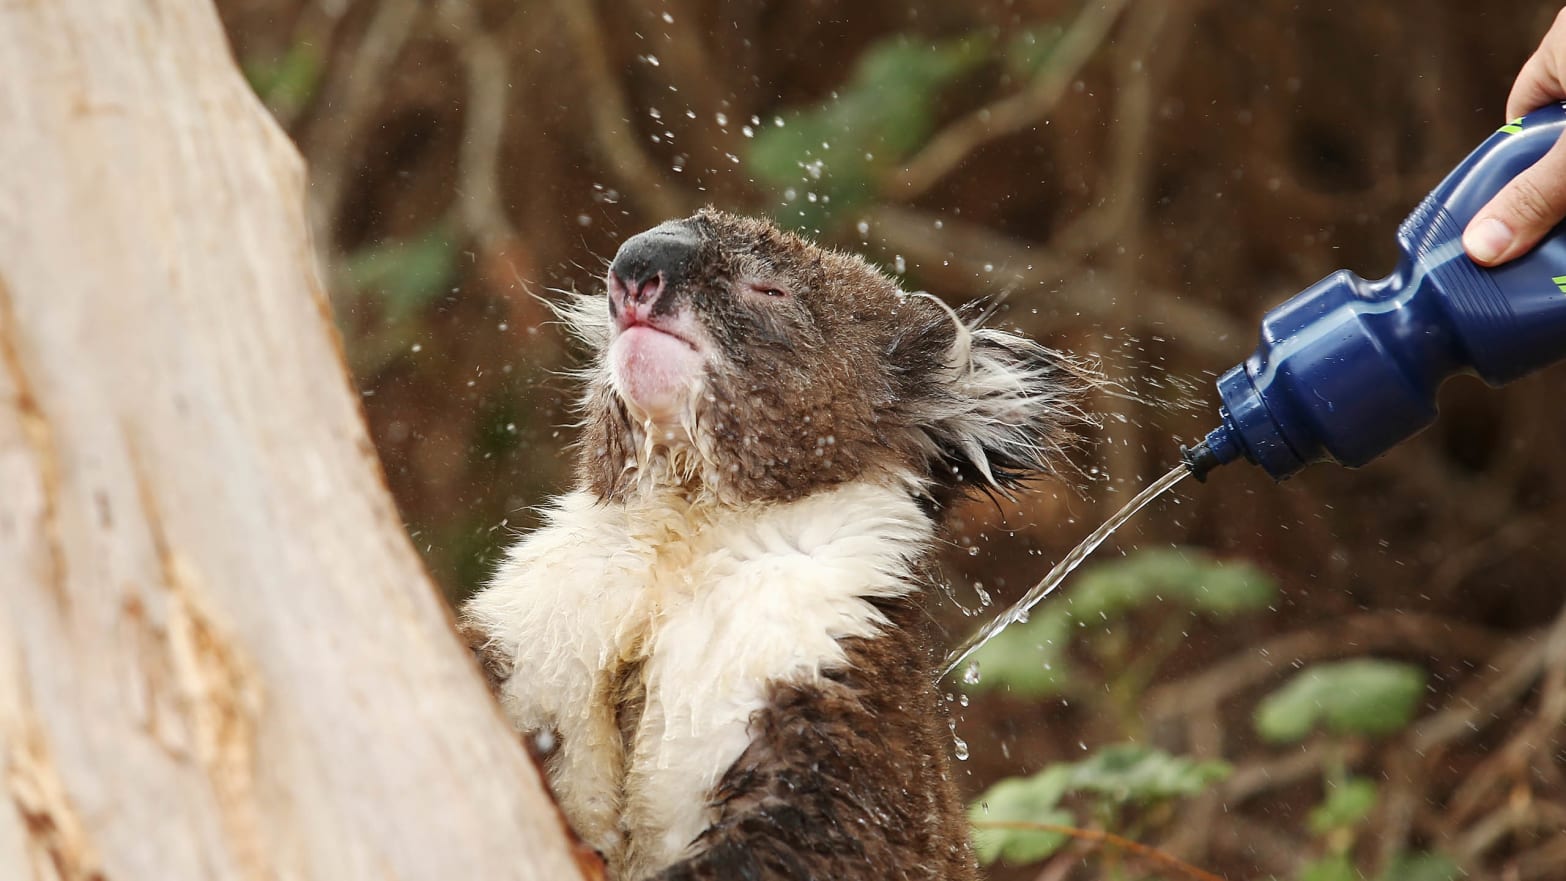 image of koala from adelaide australia getting water squirted on him heat wave heatwave climate change global warming summer